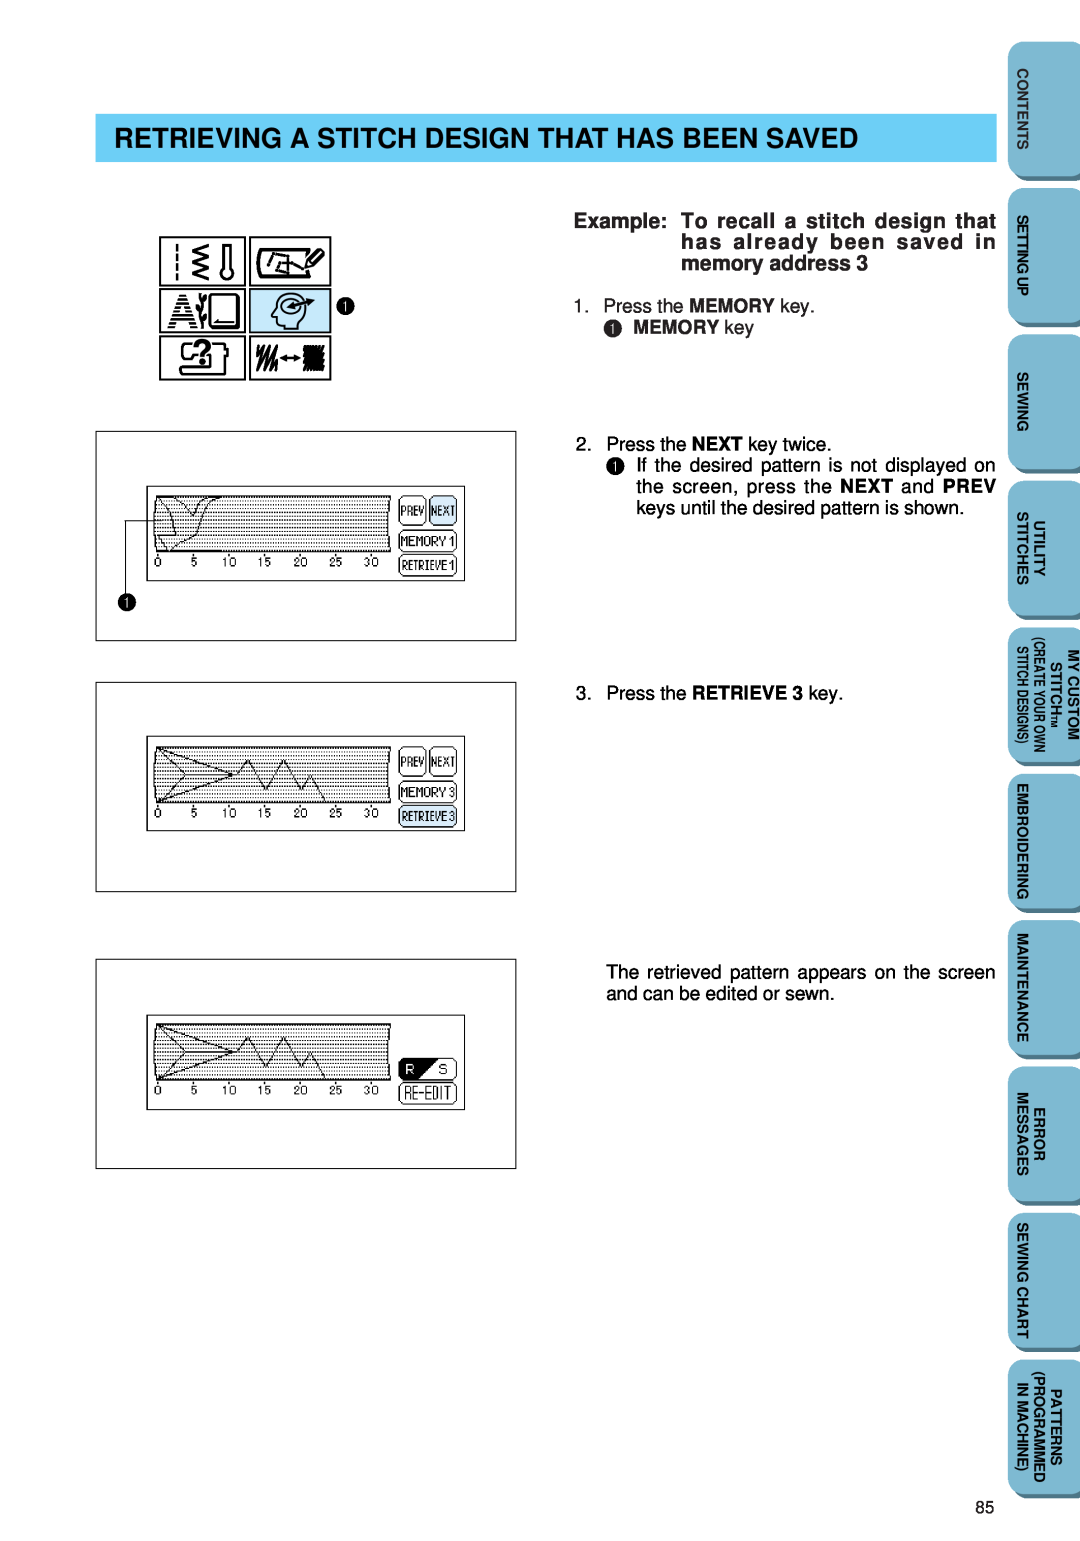 Brother PC 6500 operation manual Retrieving A Stitch Design That Has Been Saved, MEMORY key 